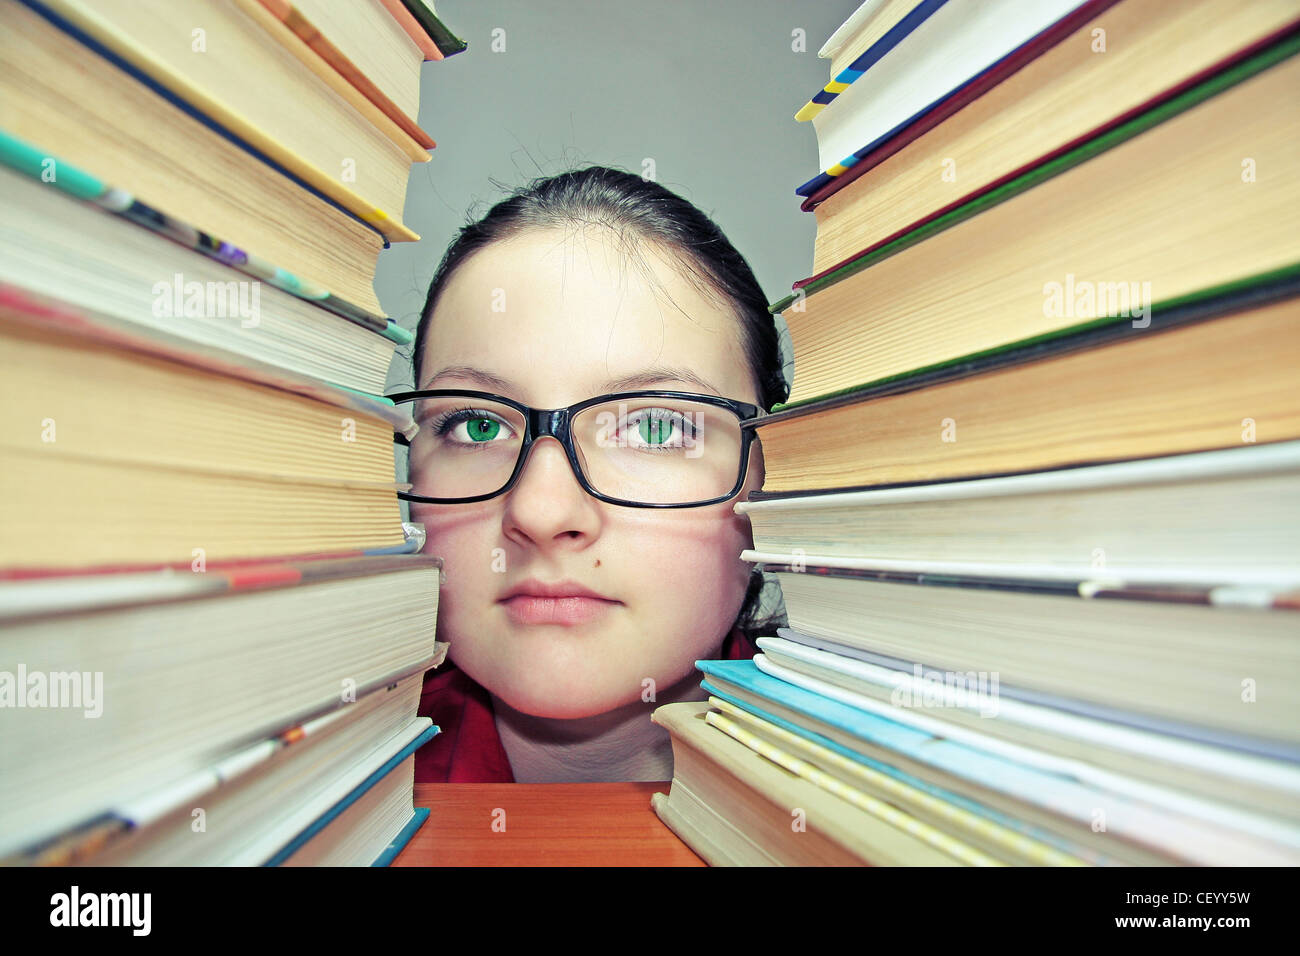 portrait of a girl peeping from the books Stock Photo